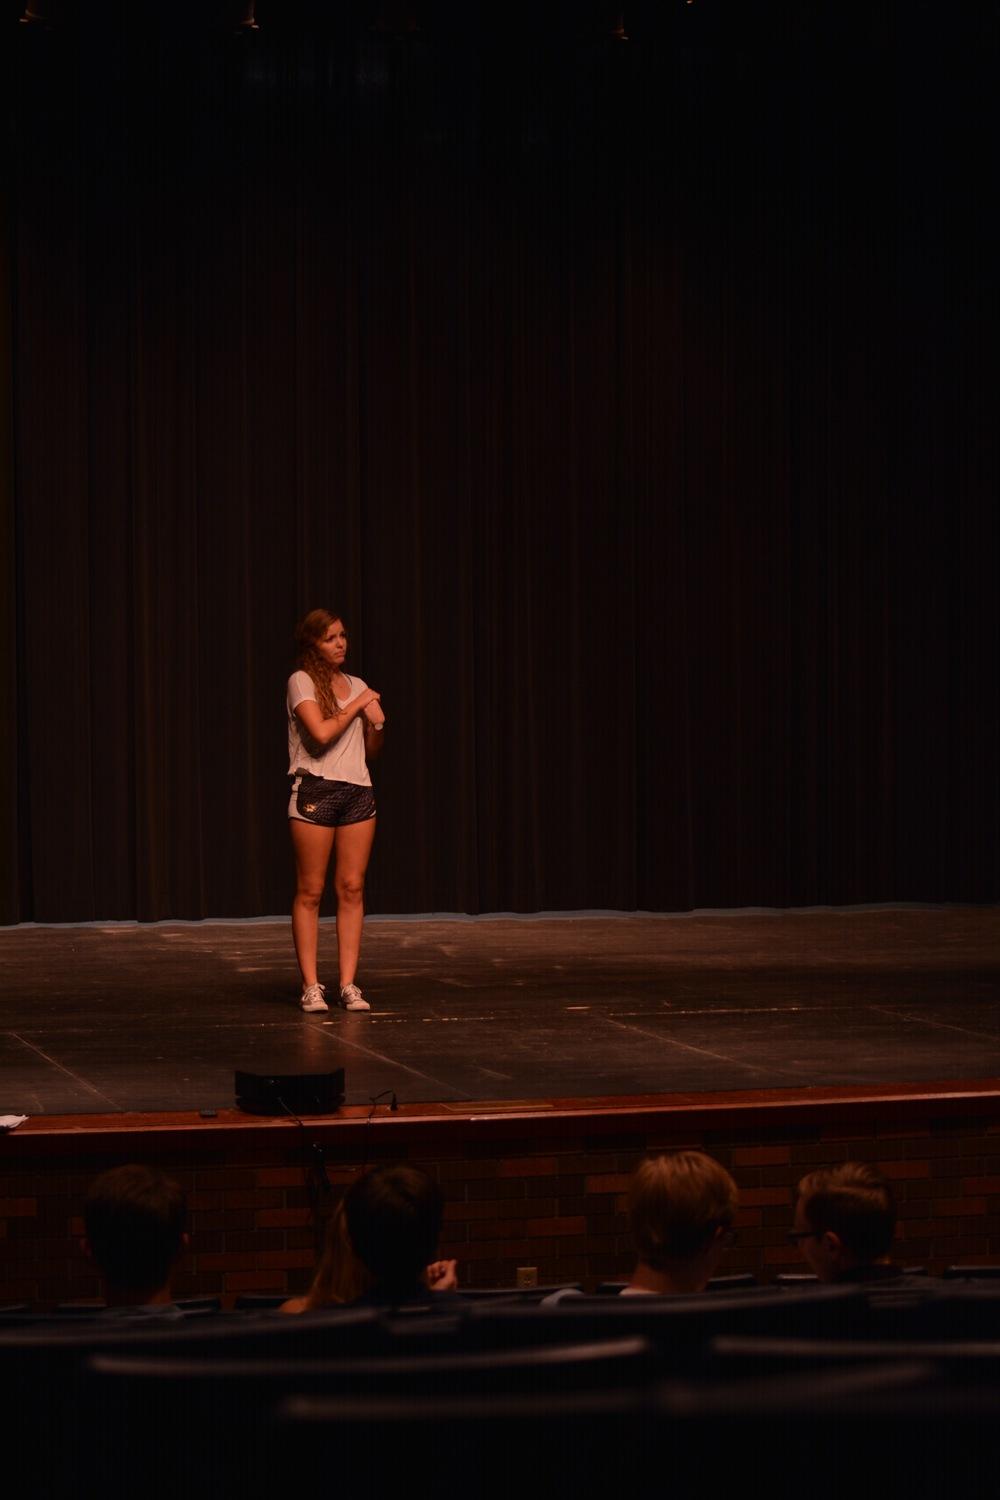 Senior Sarah Merrifield sings her vocal solo audition in front of fellow auditionees and judges.